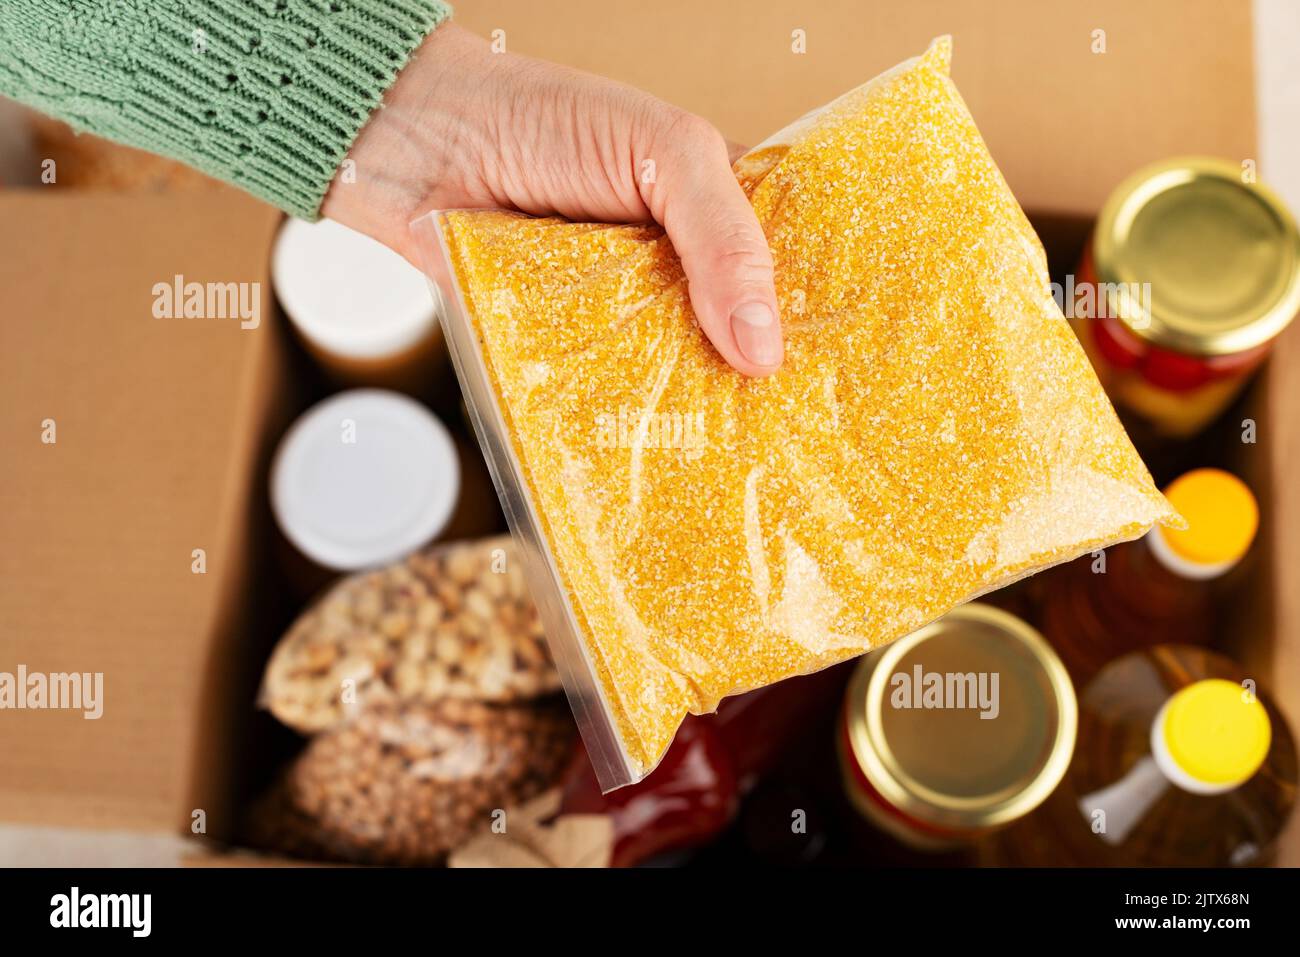 Plastic container with corn grits in female hand on emergency food box background. Stock Photo